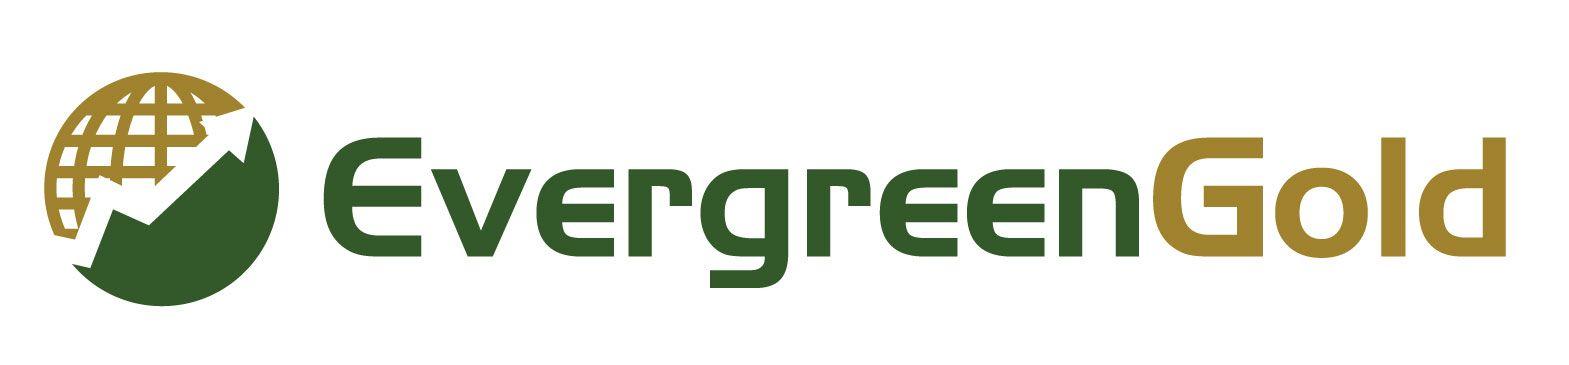 Green and Gold Logo - Franchise Businesses For Sale - Evergreen Gold Business Brokers